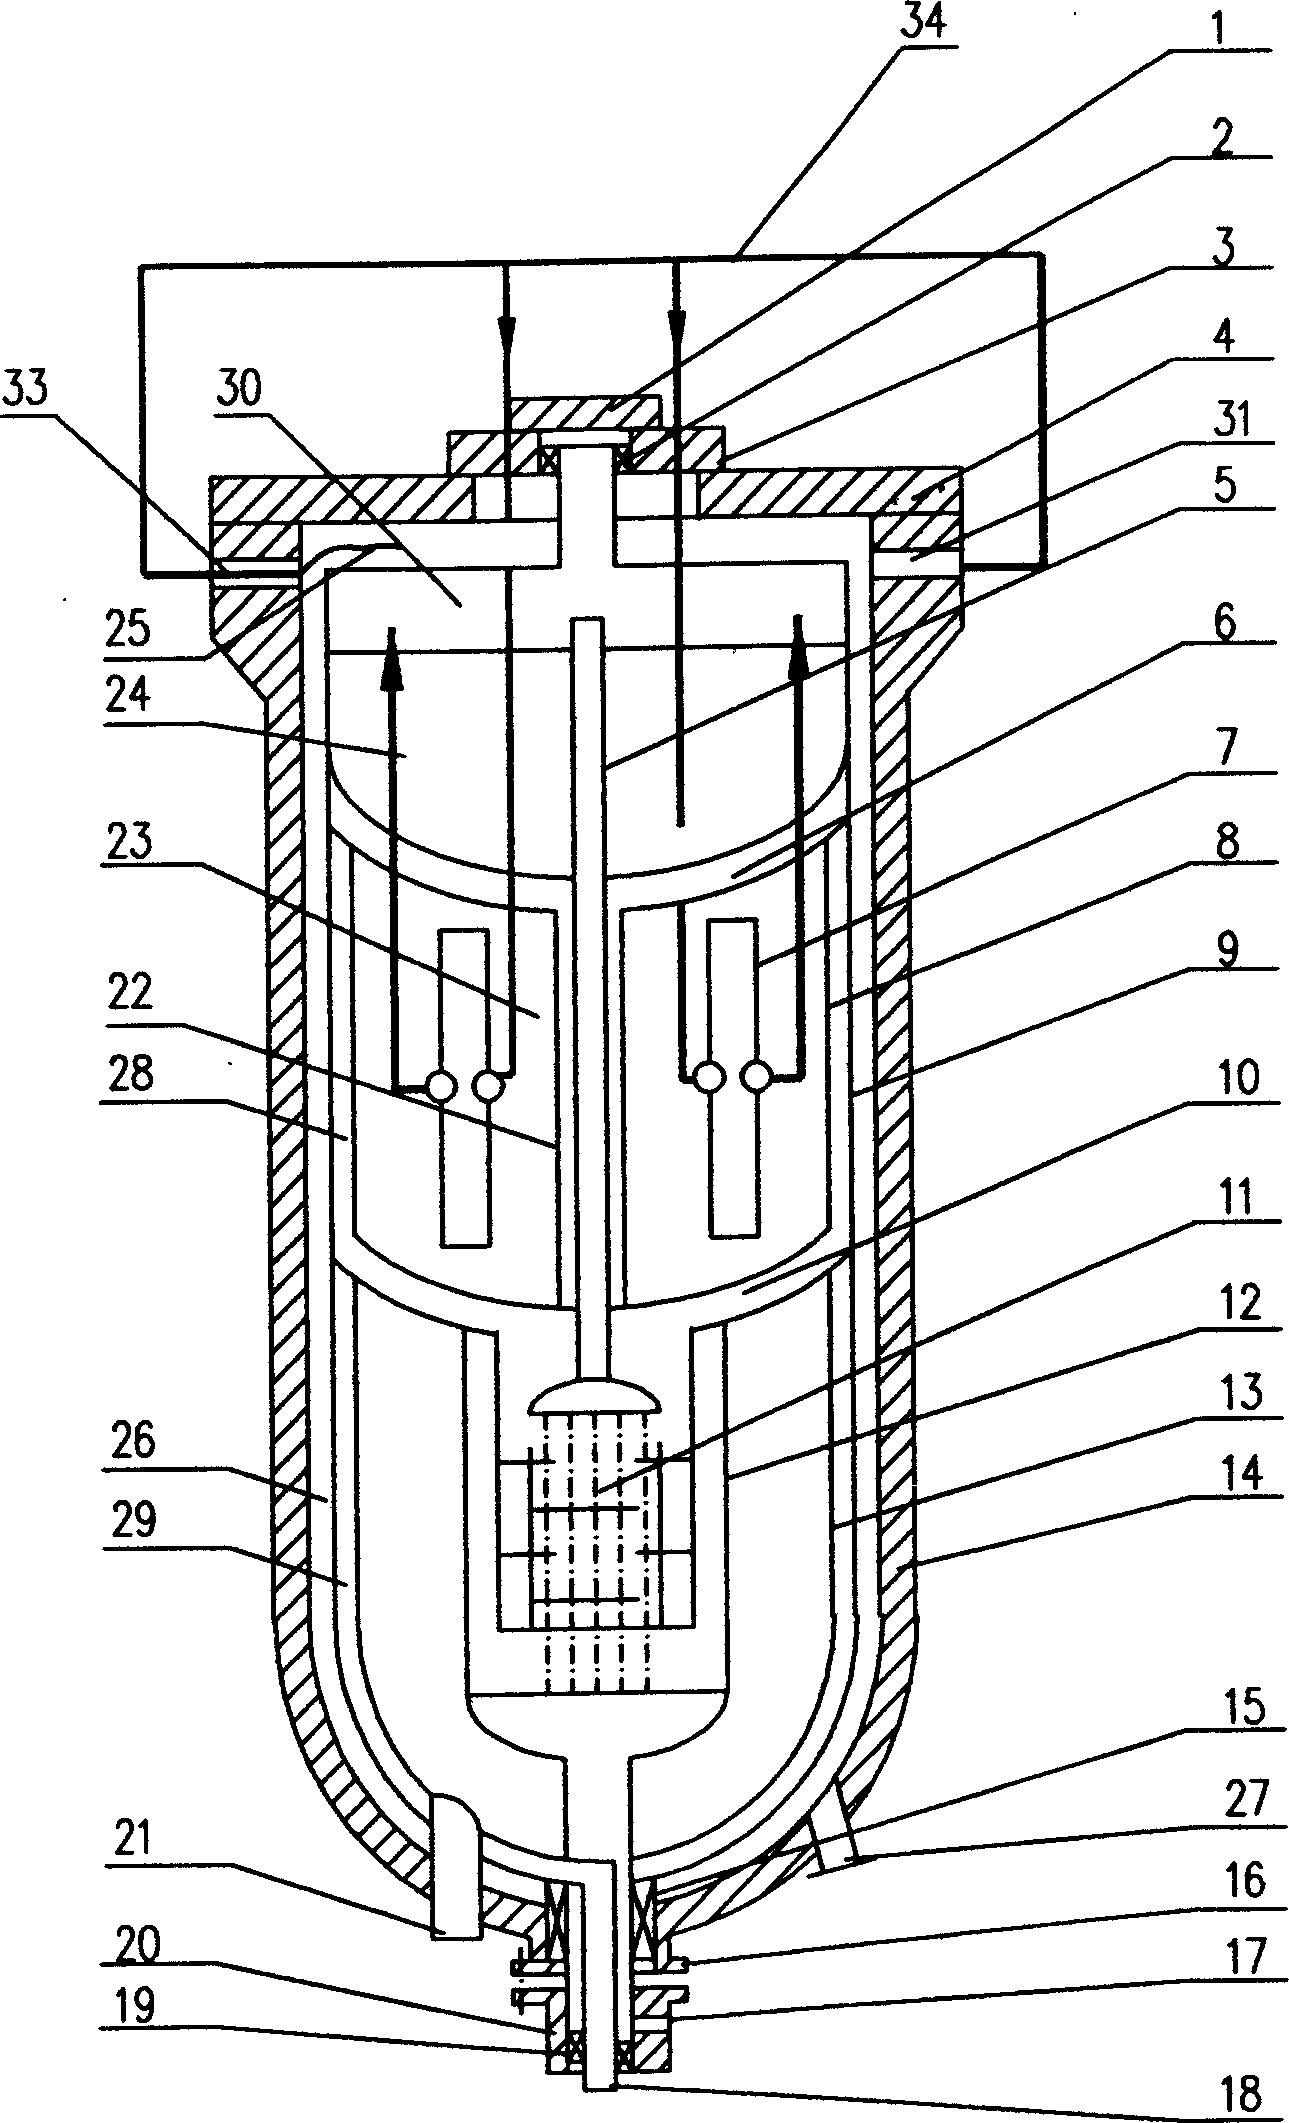 Multistage gas solie chemical reactor